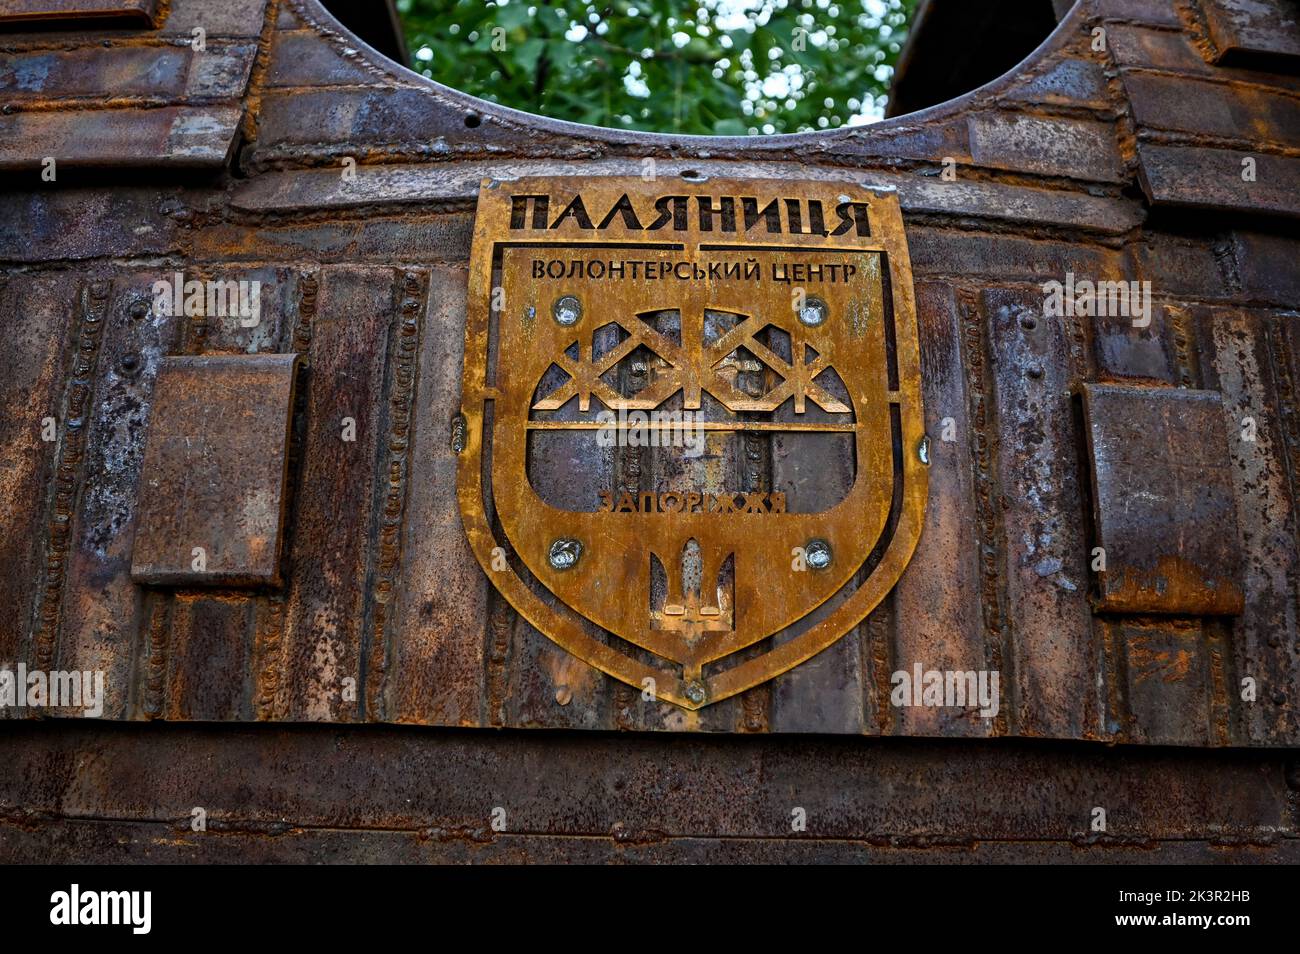 ZAPORIZHZHIA, UKRAINE - SEPTEMBER 13, 2022 - The logo of the Palianytsia volunteer centre is attached to the 2.5-tonne monument to the bulletproof ves Stock Photo